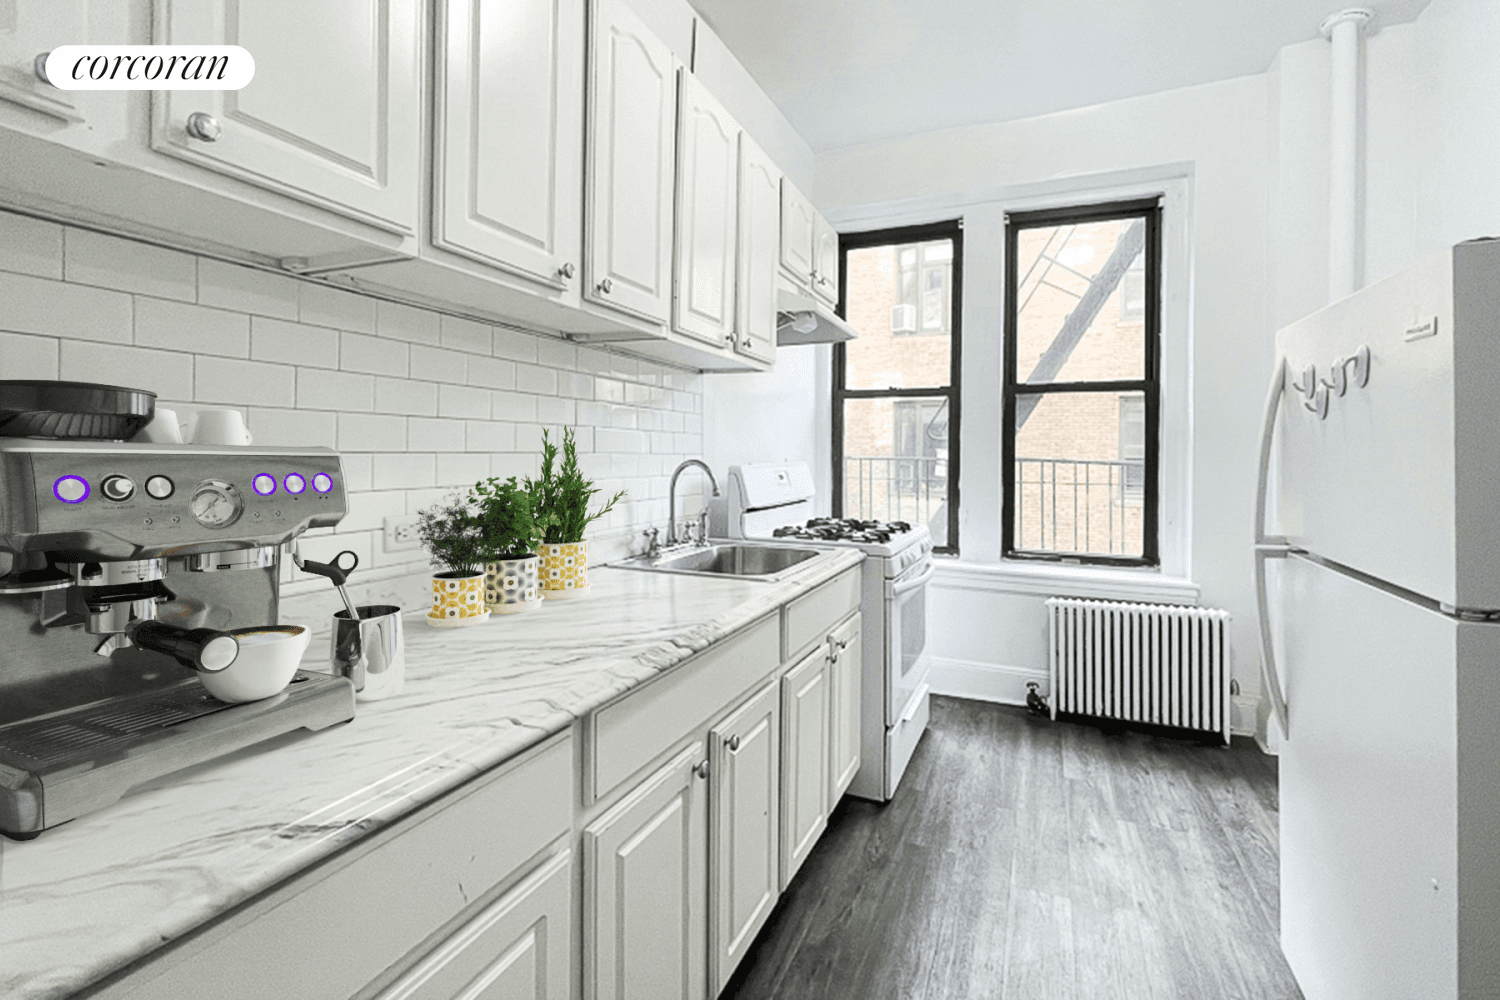 Huge four bedroom in doorman building at the corner of Broadway amp ; West 110th Street Amazing location surrounded by parks, public transit subway, and the campuses of Columbia University ...